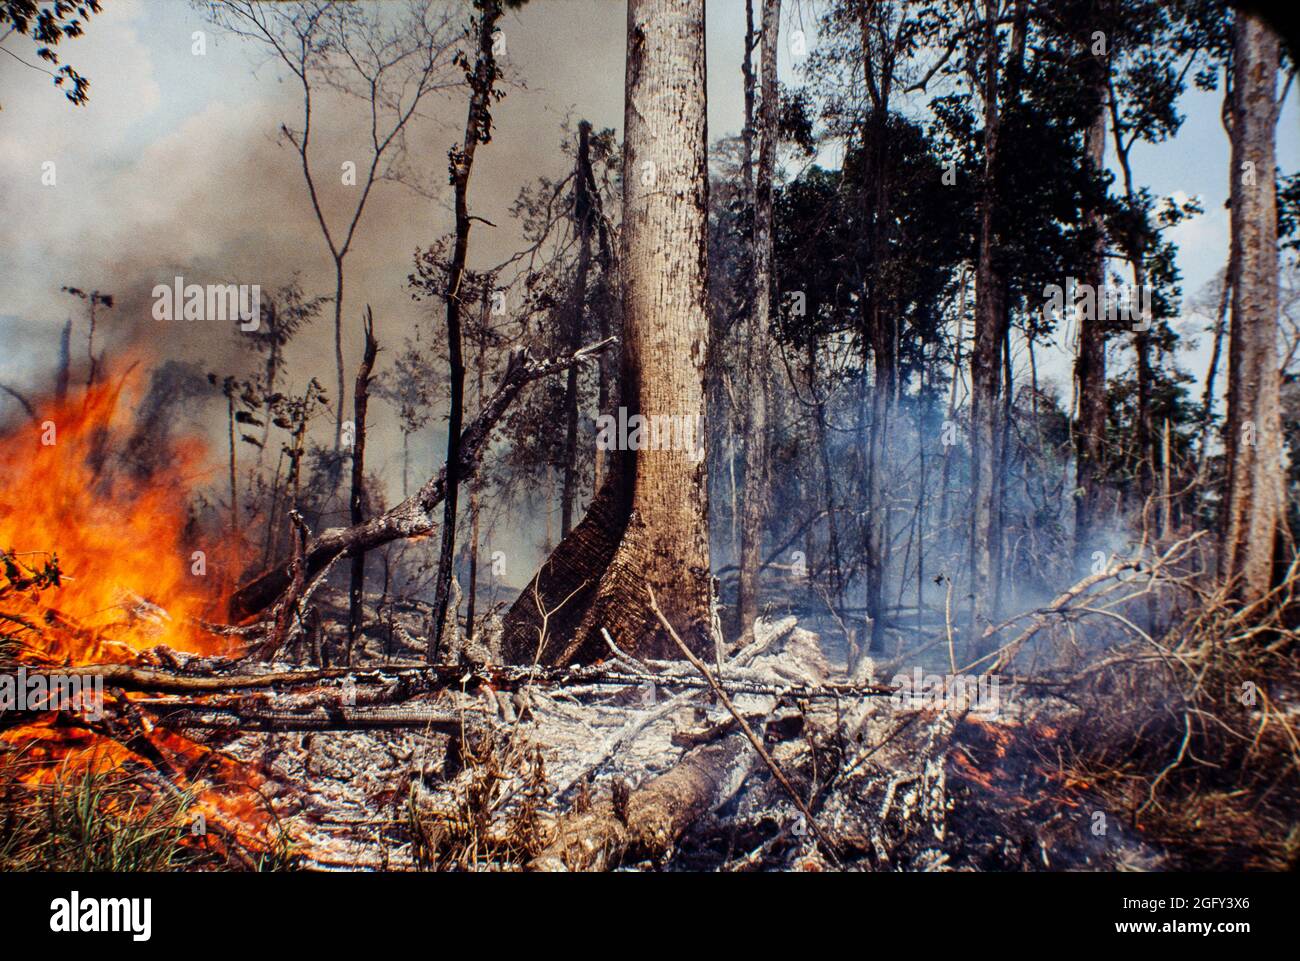 Flames and heat, detail of Amazon rainforest burning, environmental degradation caused by deforestation. Stock Photo